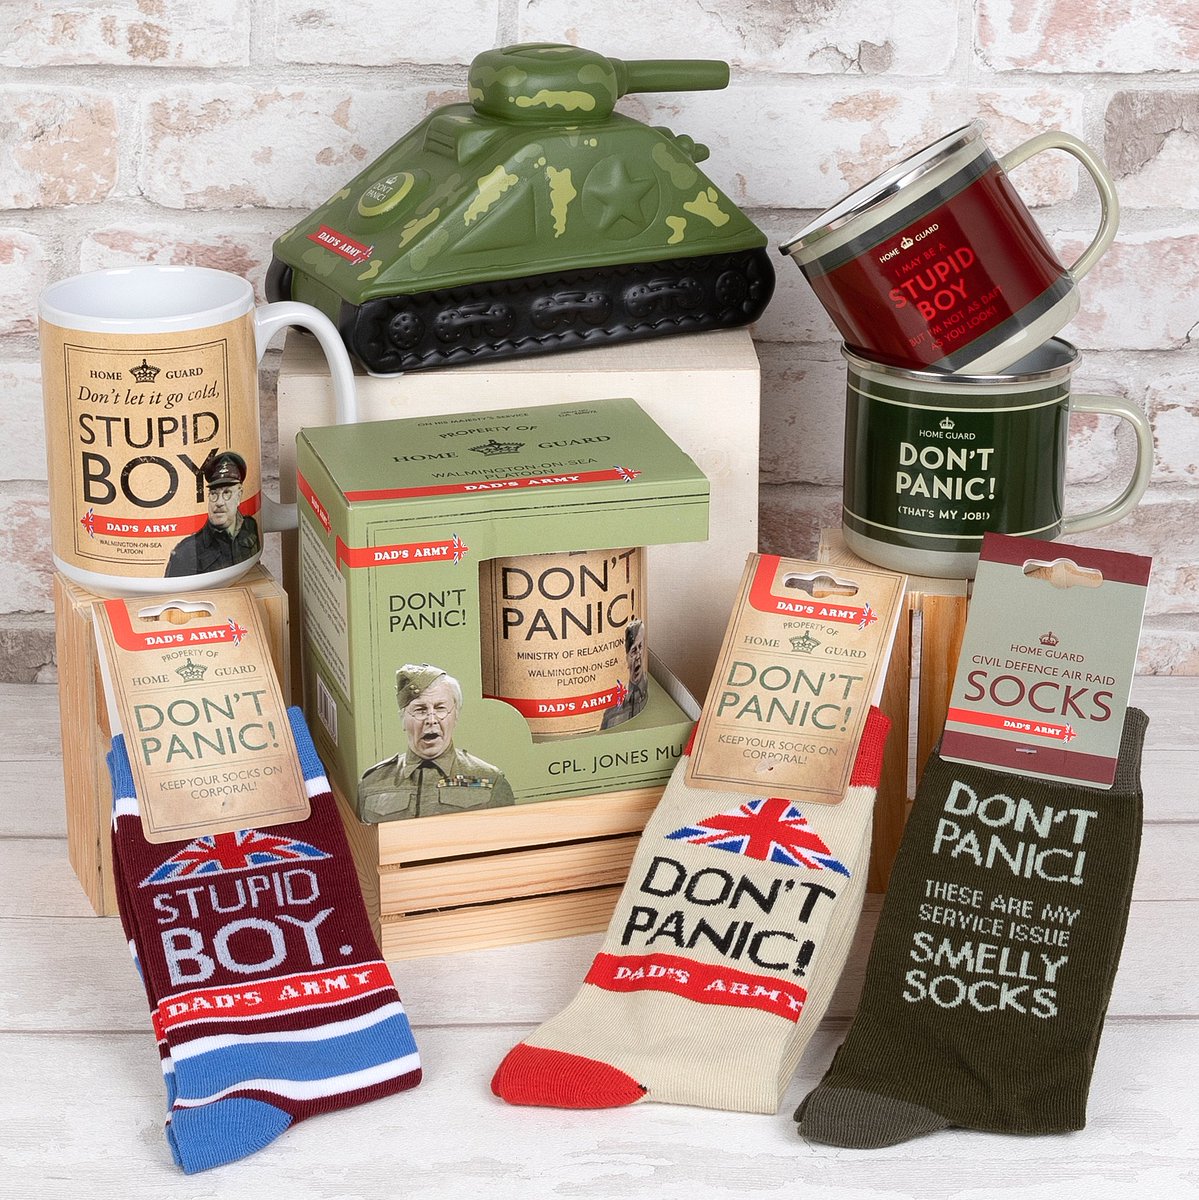 We have a great selection of gifts for father's day.
To see all our men's gifts online please follow the link;
//shop.joedavies.co.uk/category/fathers-day
#joedaviesgifts @joedaviesgifts  #gifts #giftware #giftideasuk #giftinstyle #giftidea #giftingideas #giftingideas #giftinspo